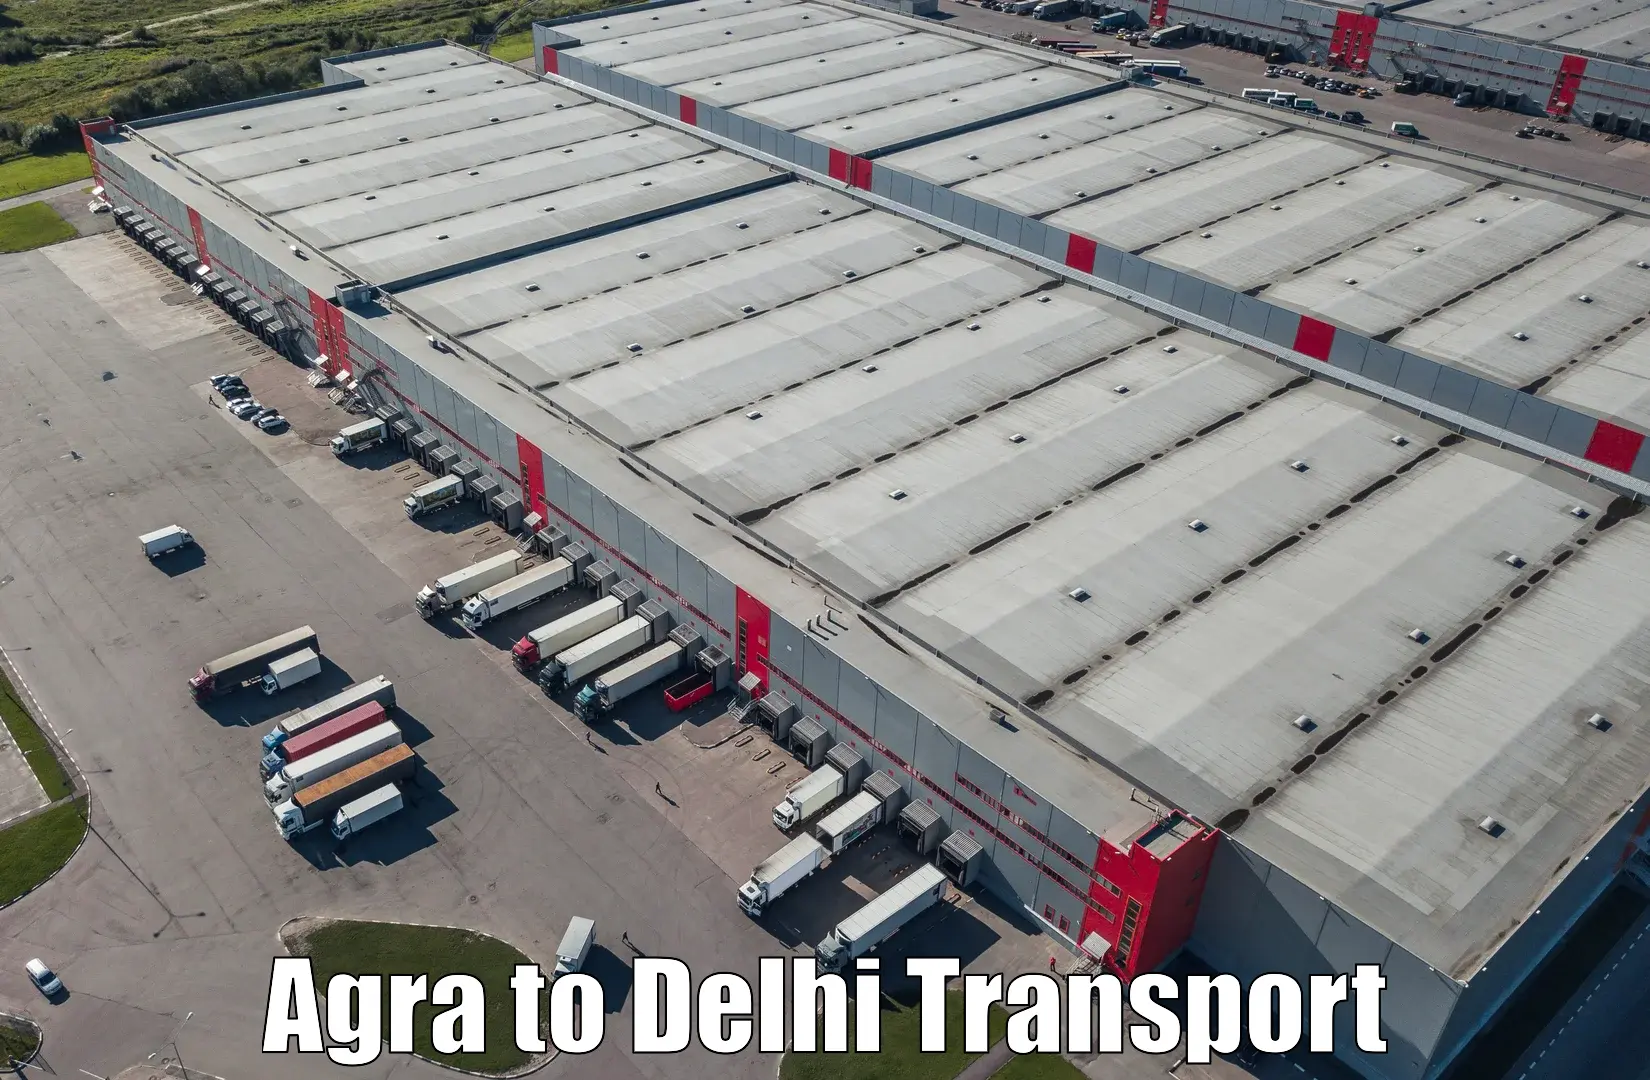 Cycle transportation service Agra to IIT Delhi